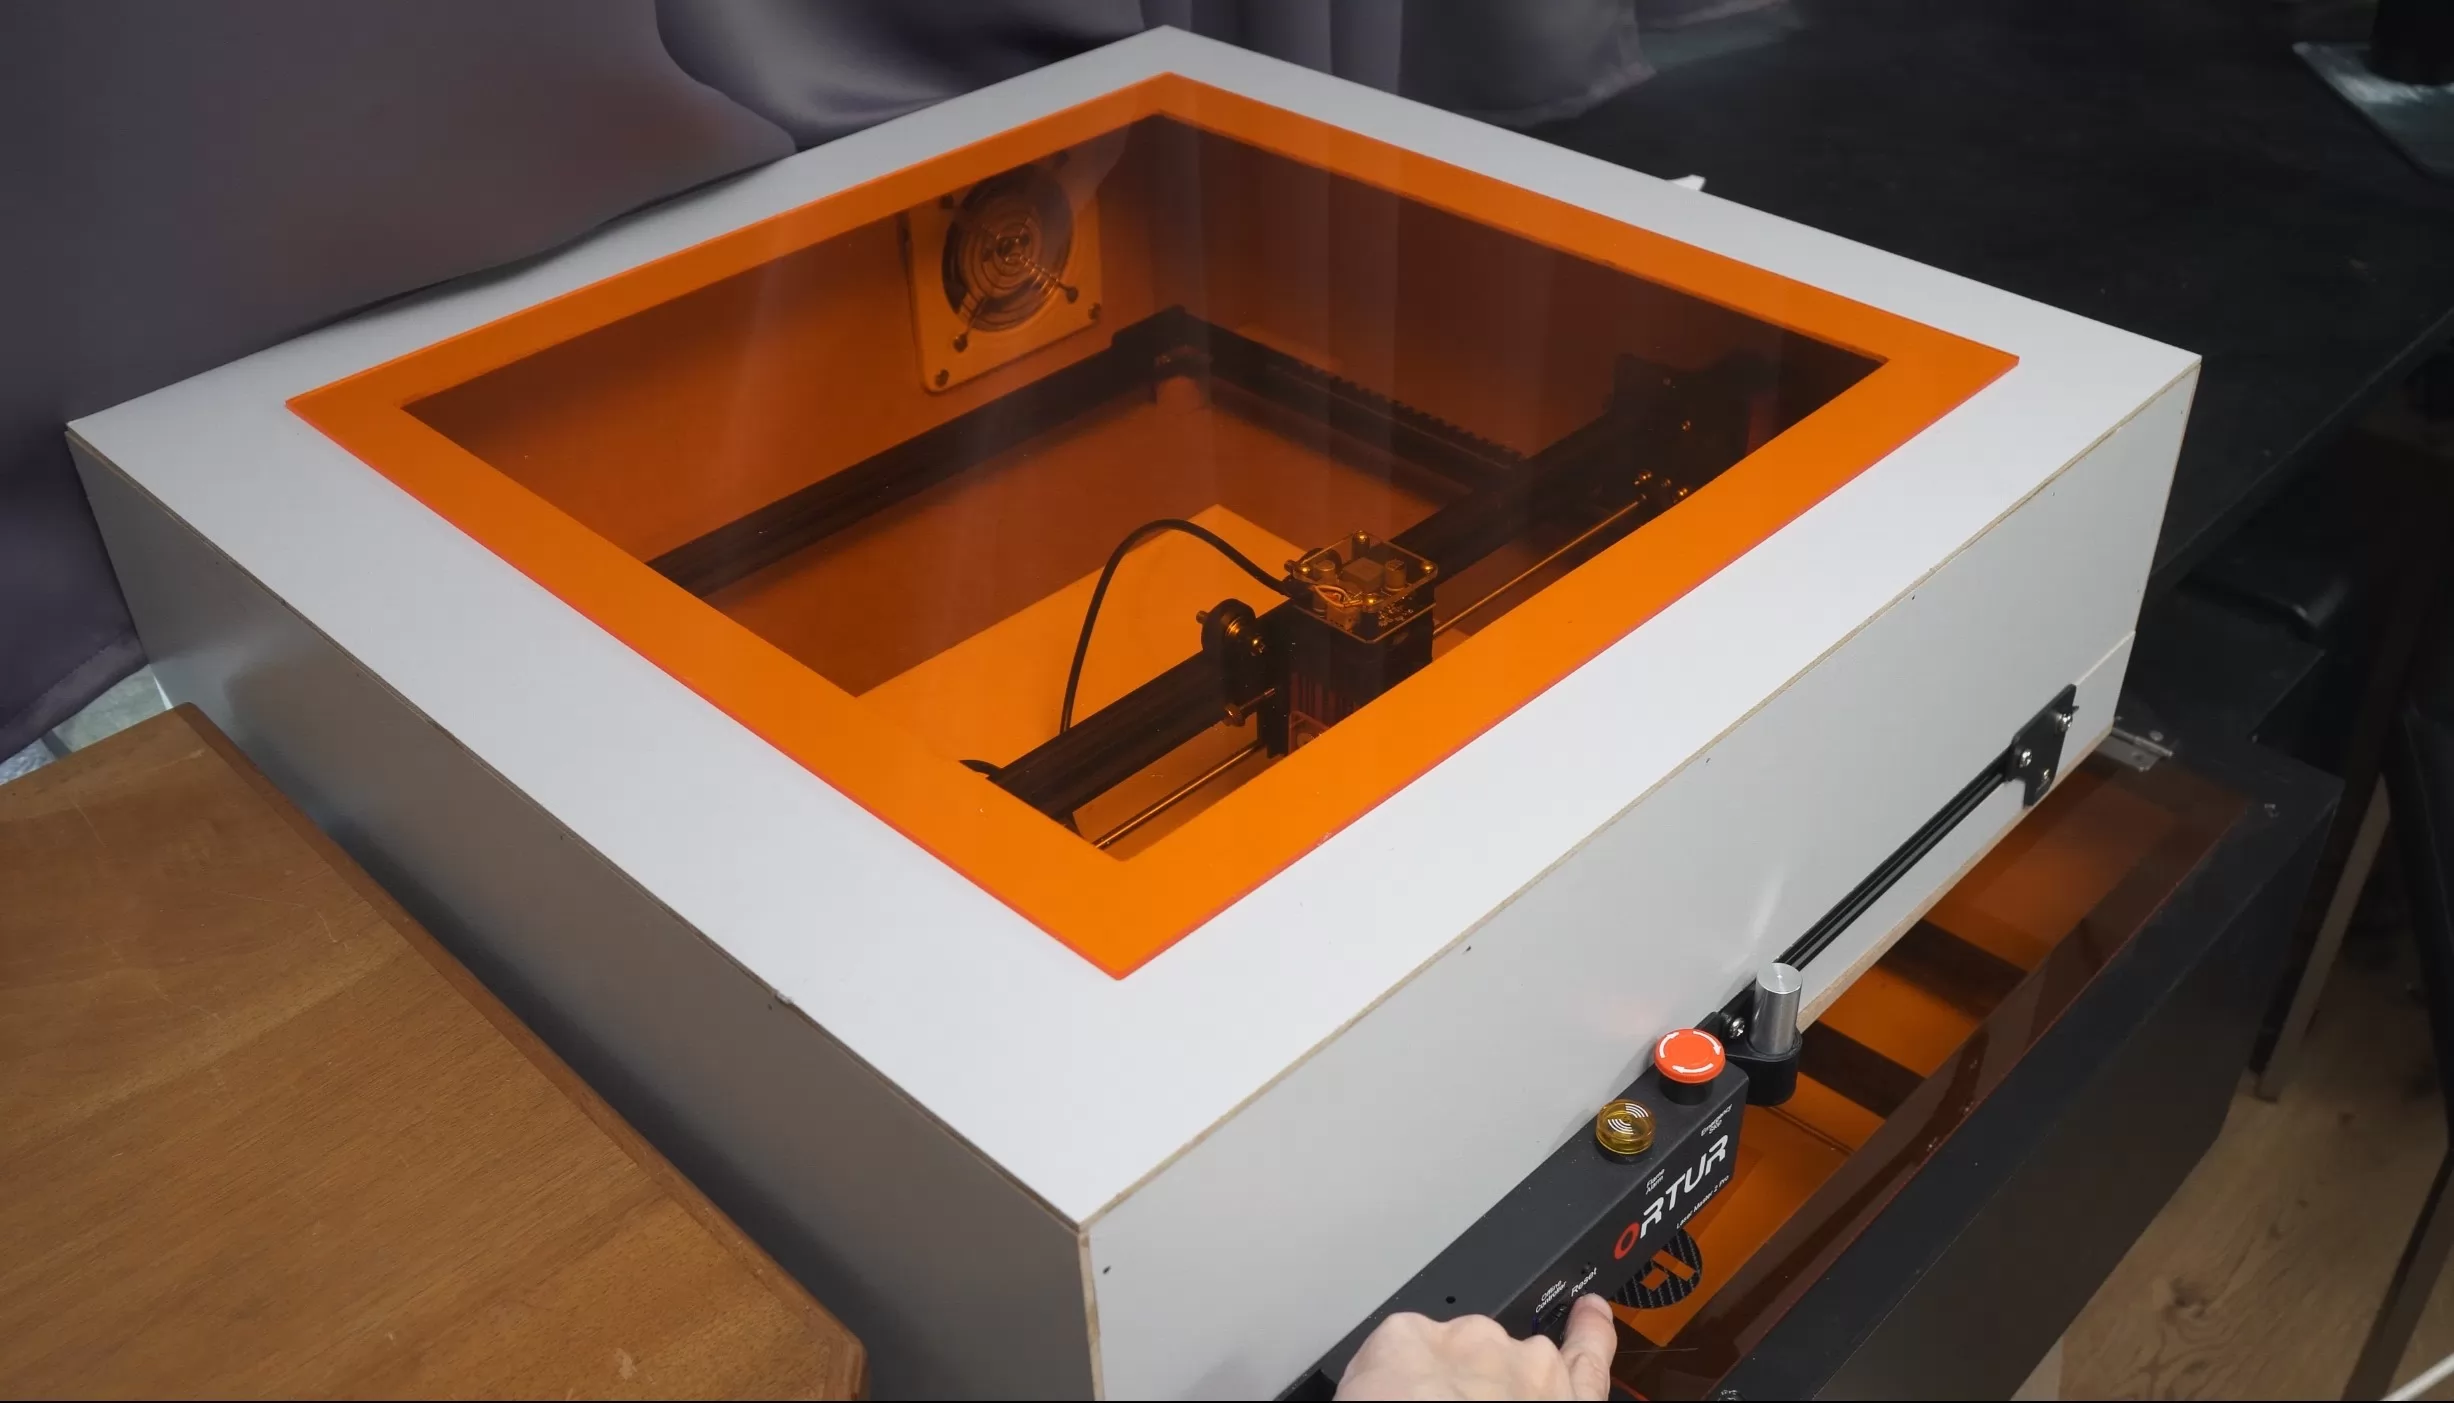 Cardboard Laser Cutter: What you need to know - Full Spectrum Laser